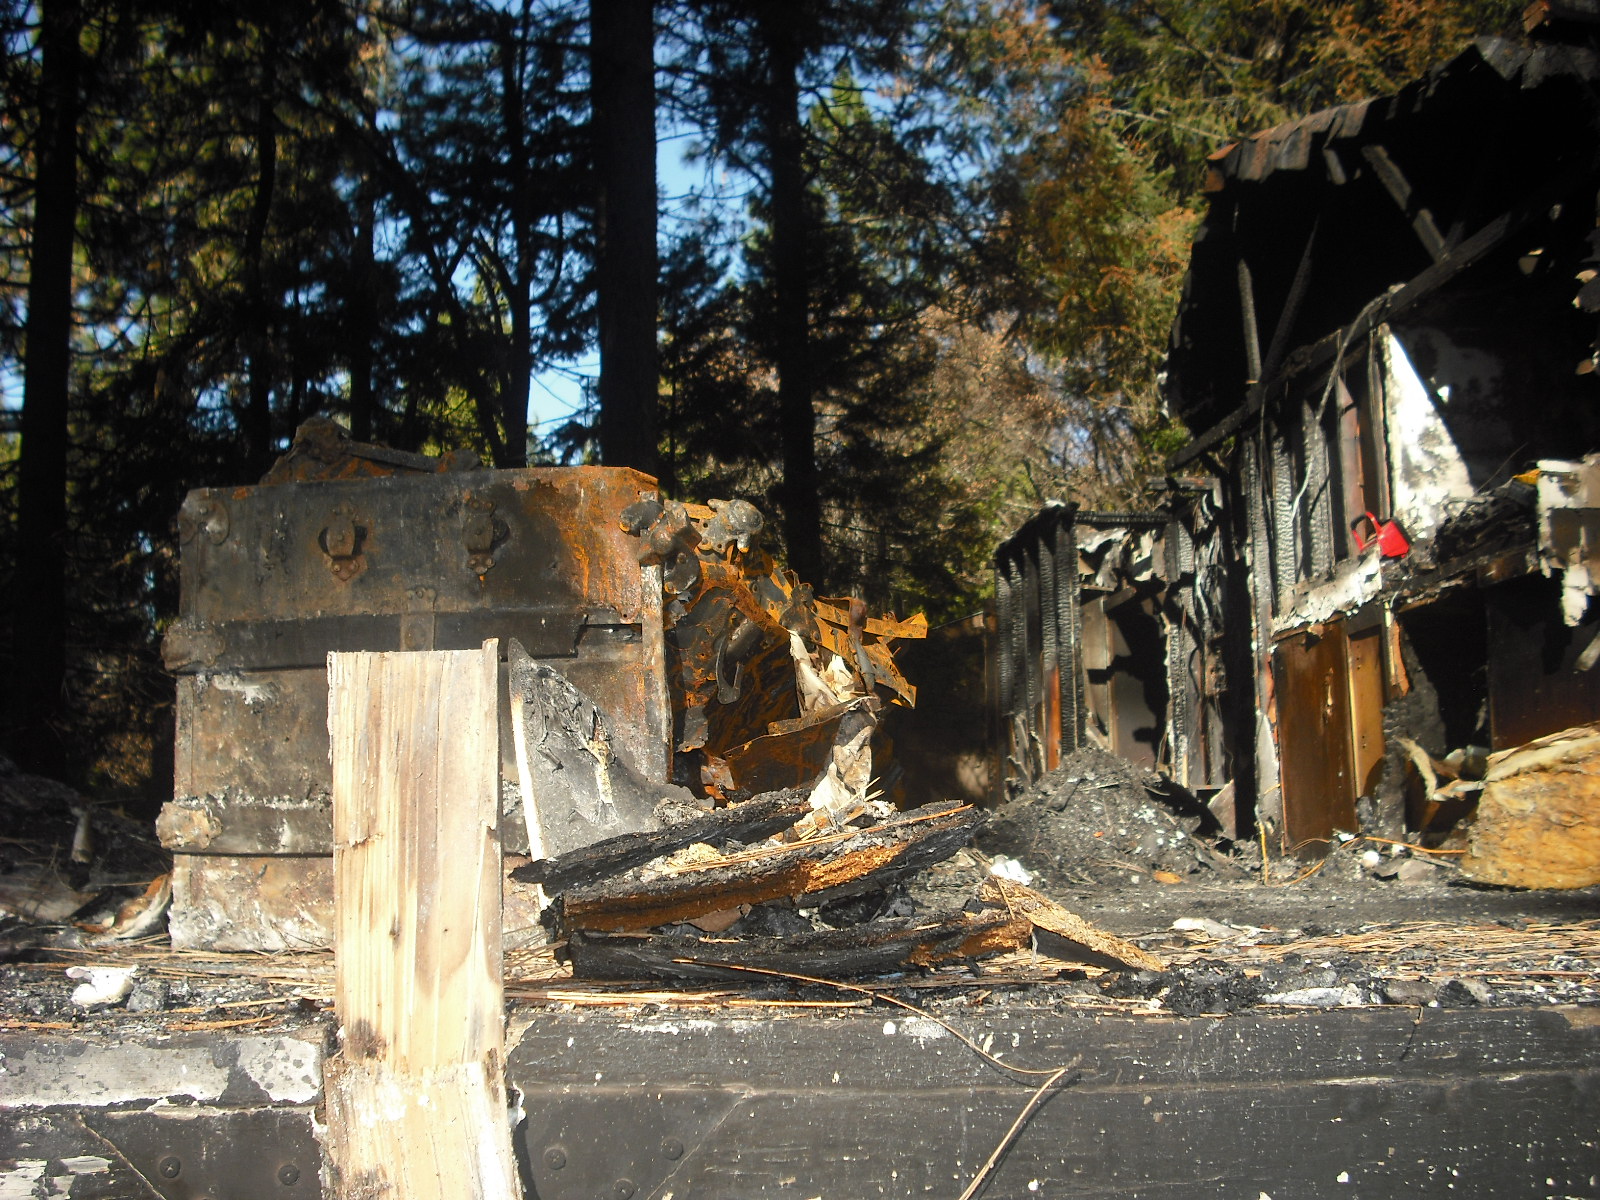 Clearing the fire damage is the home owners responsibility and can cost thousands of dollars.